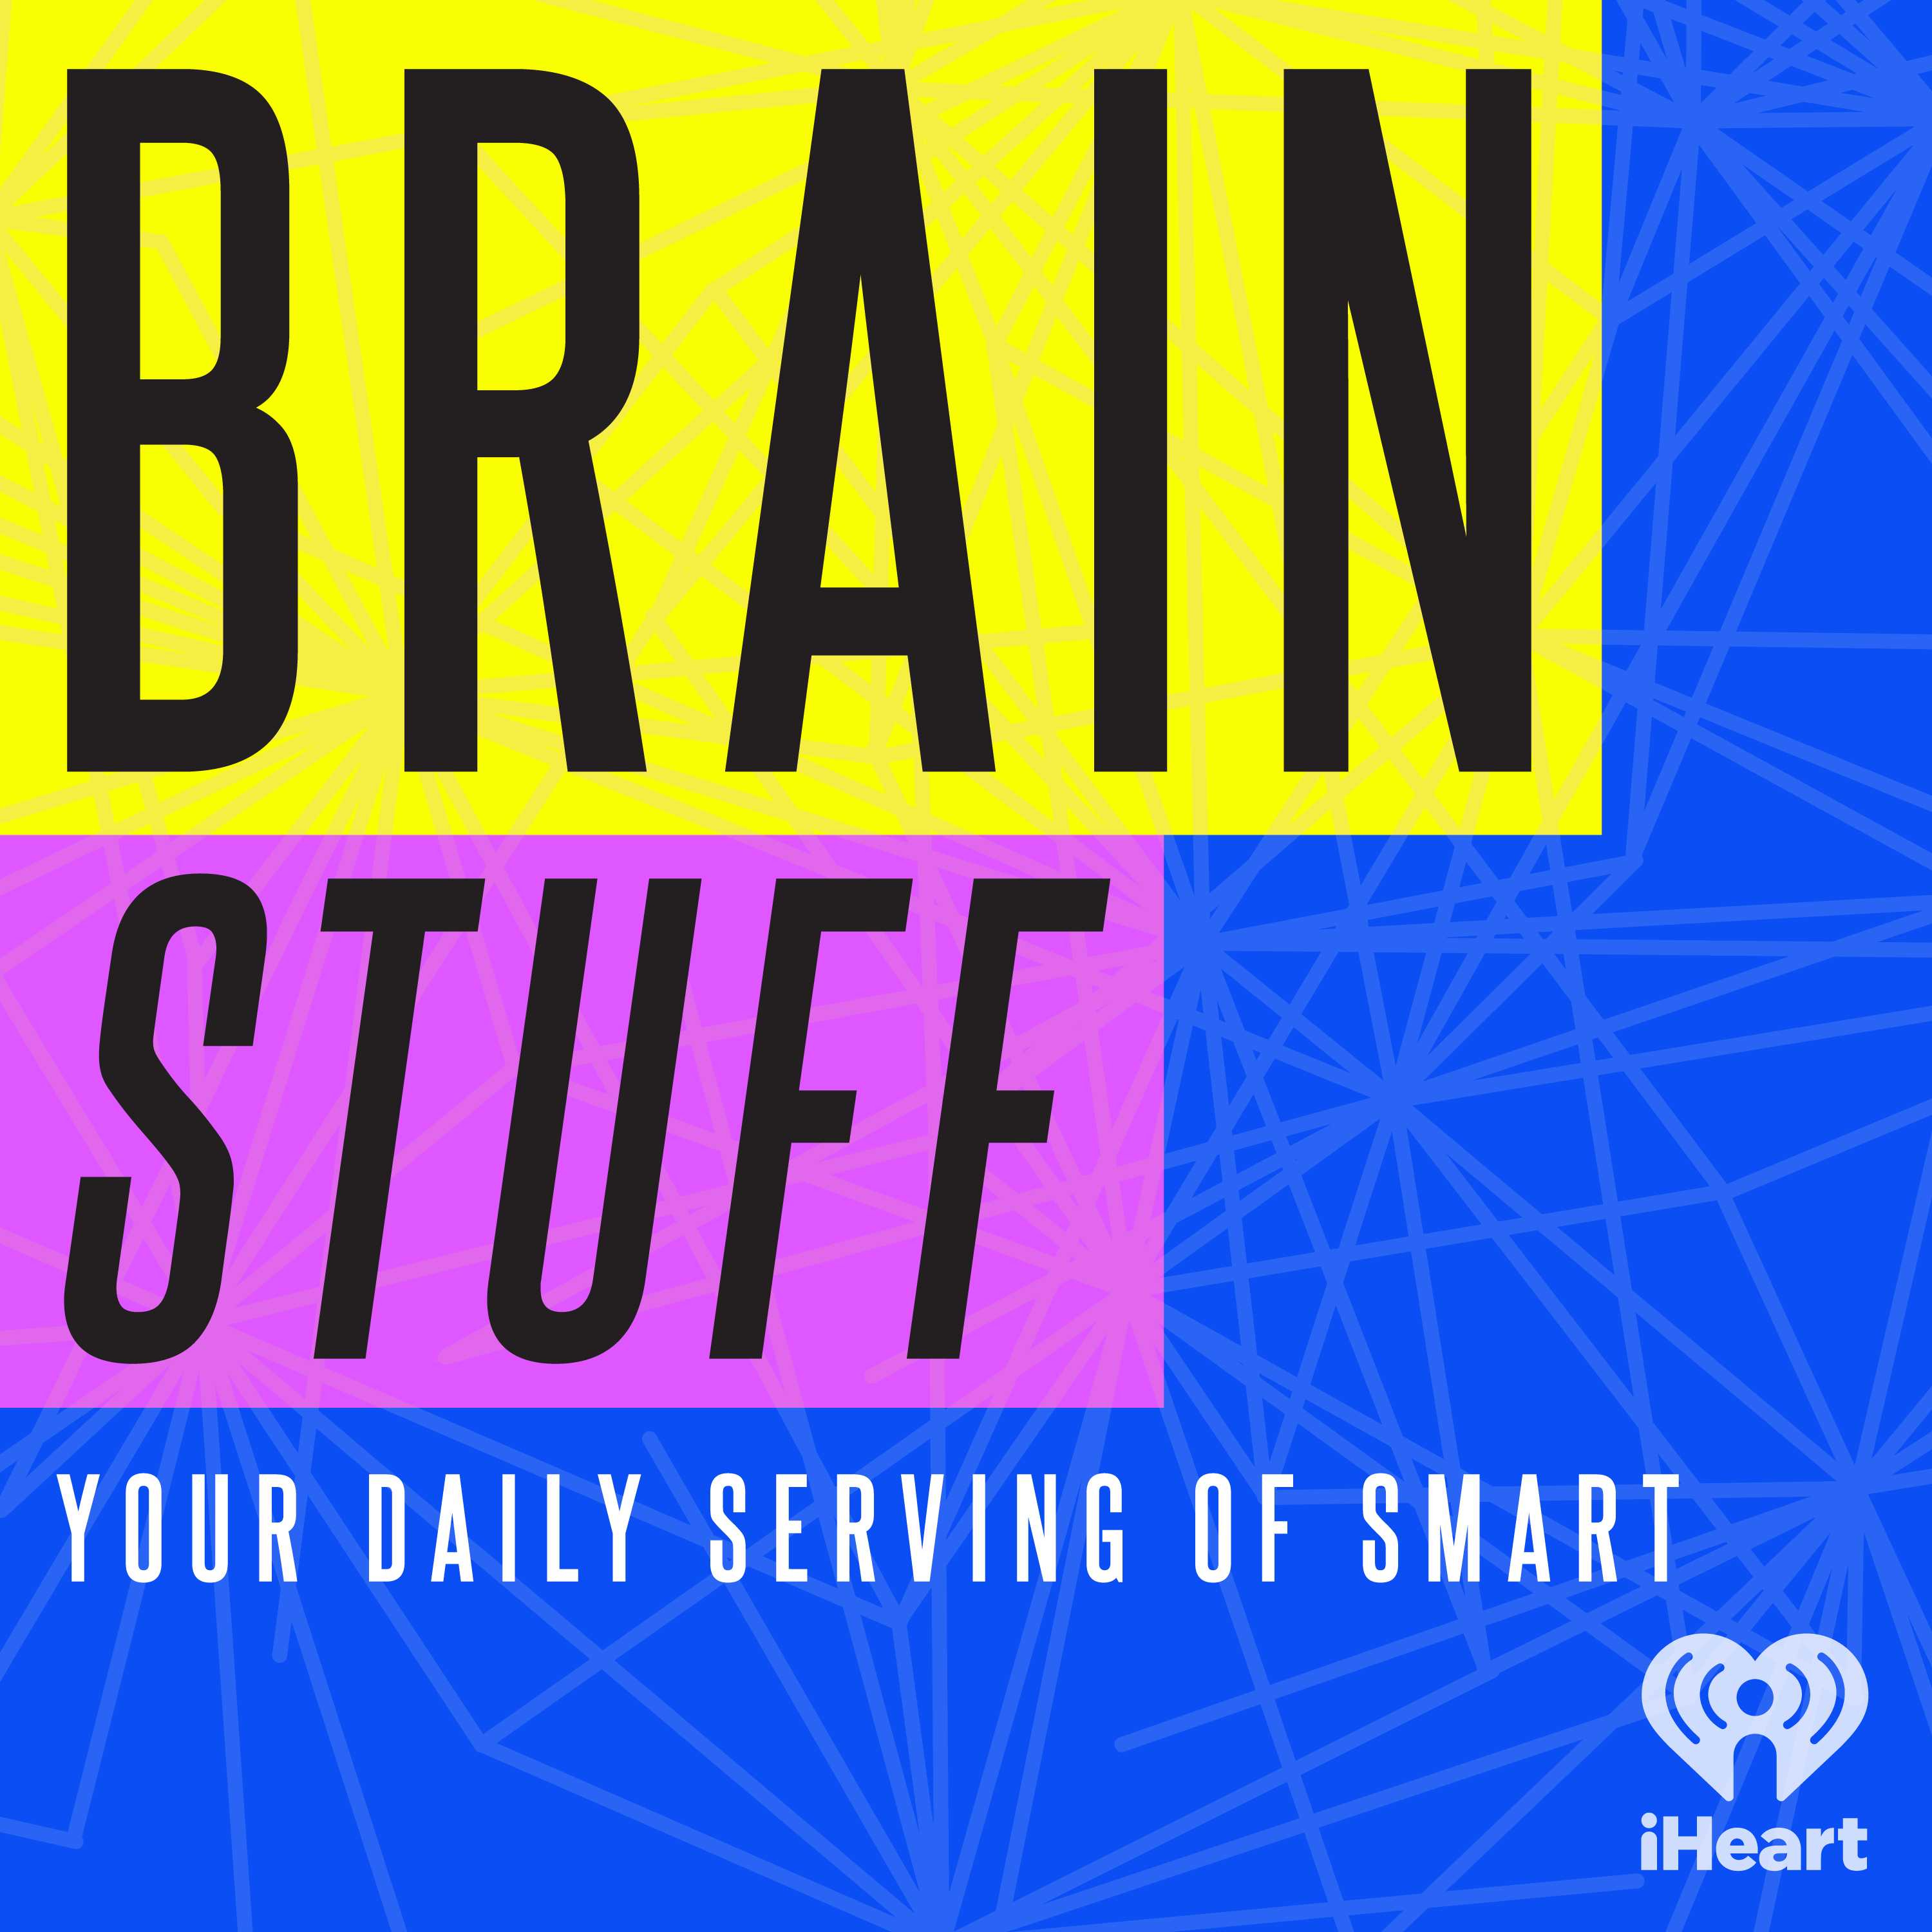 BrainStuff Classics: How Can I Donate My Brain to Science?